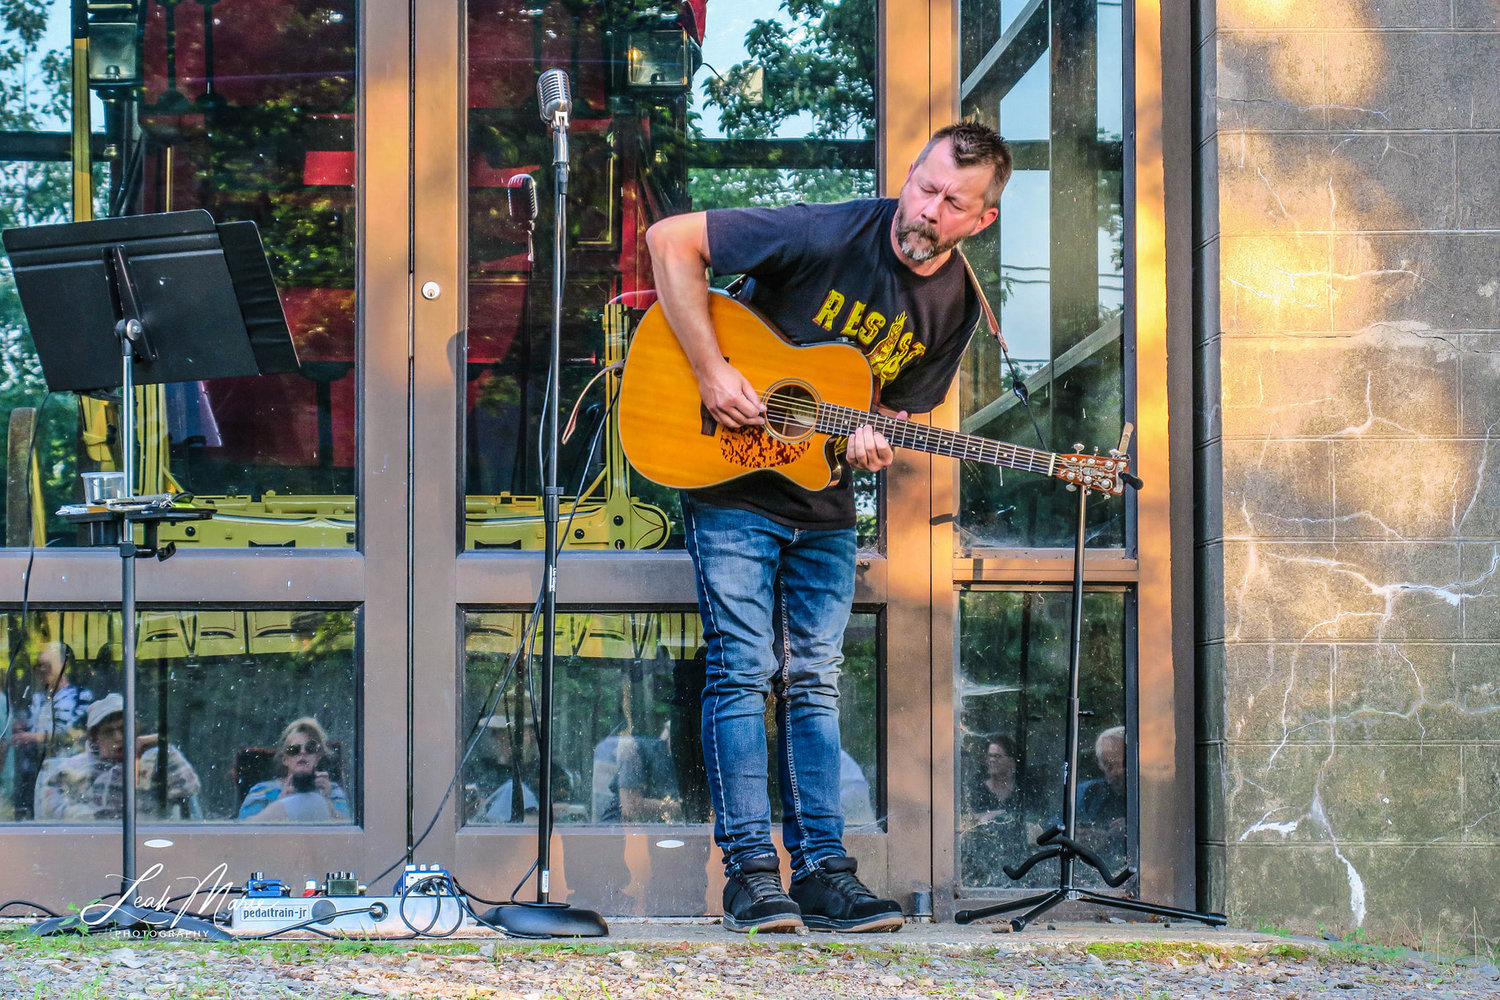 Dan Engvaldsen will perform at Tunes Along the Towpath 2 on Saturday, June 18.